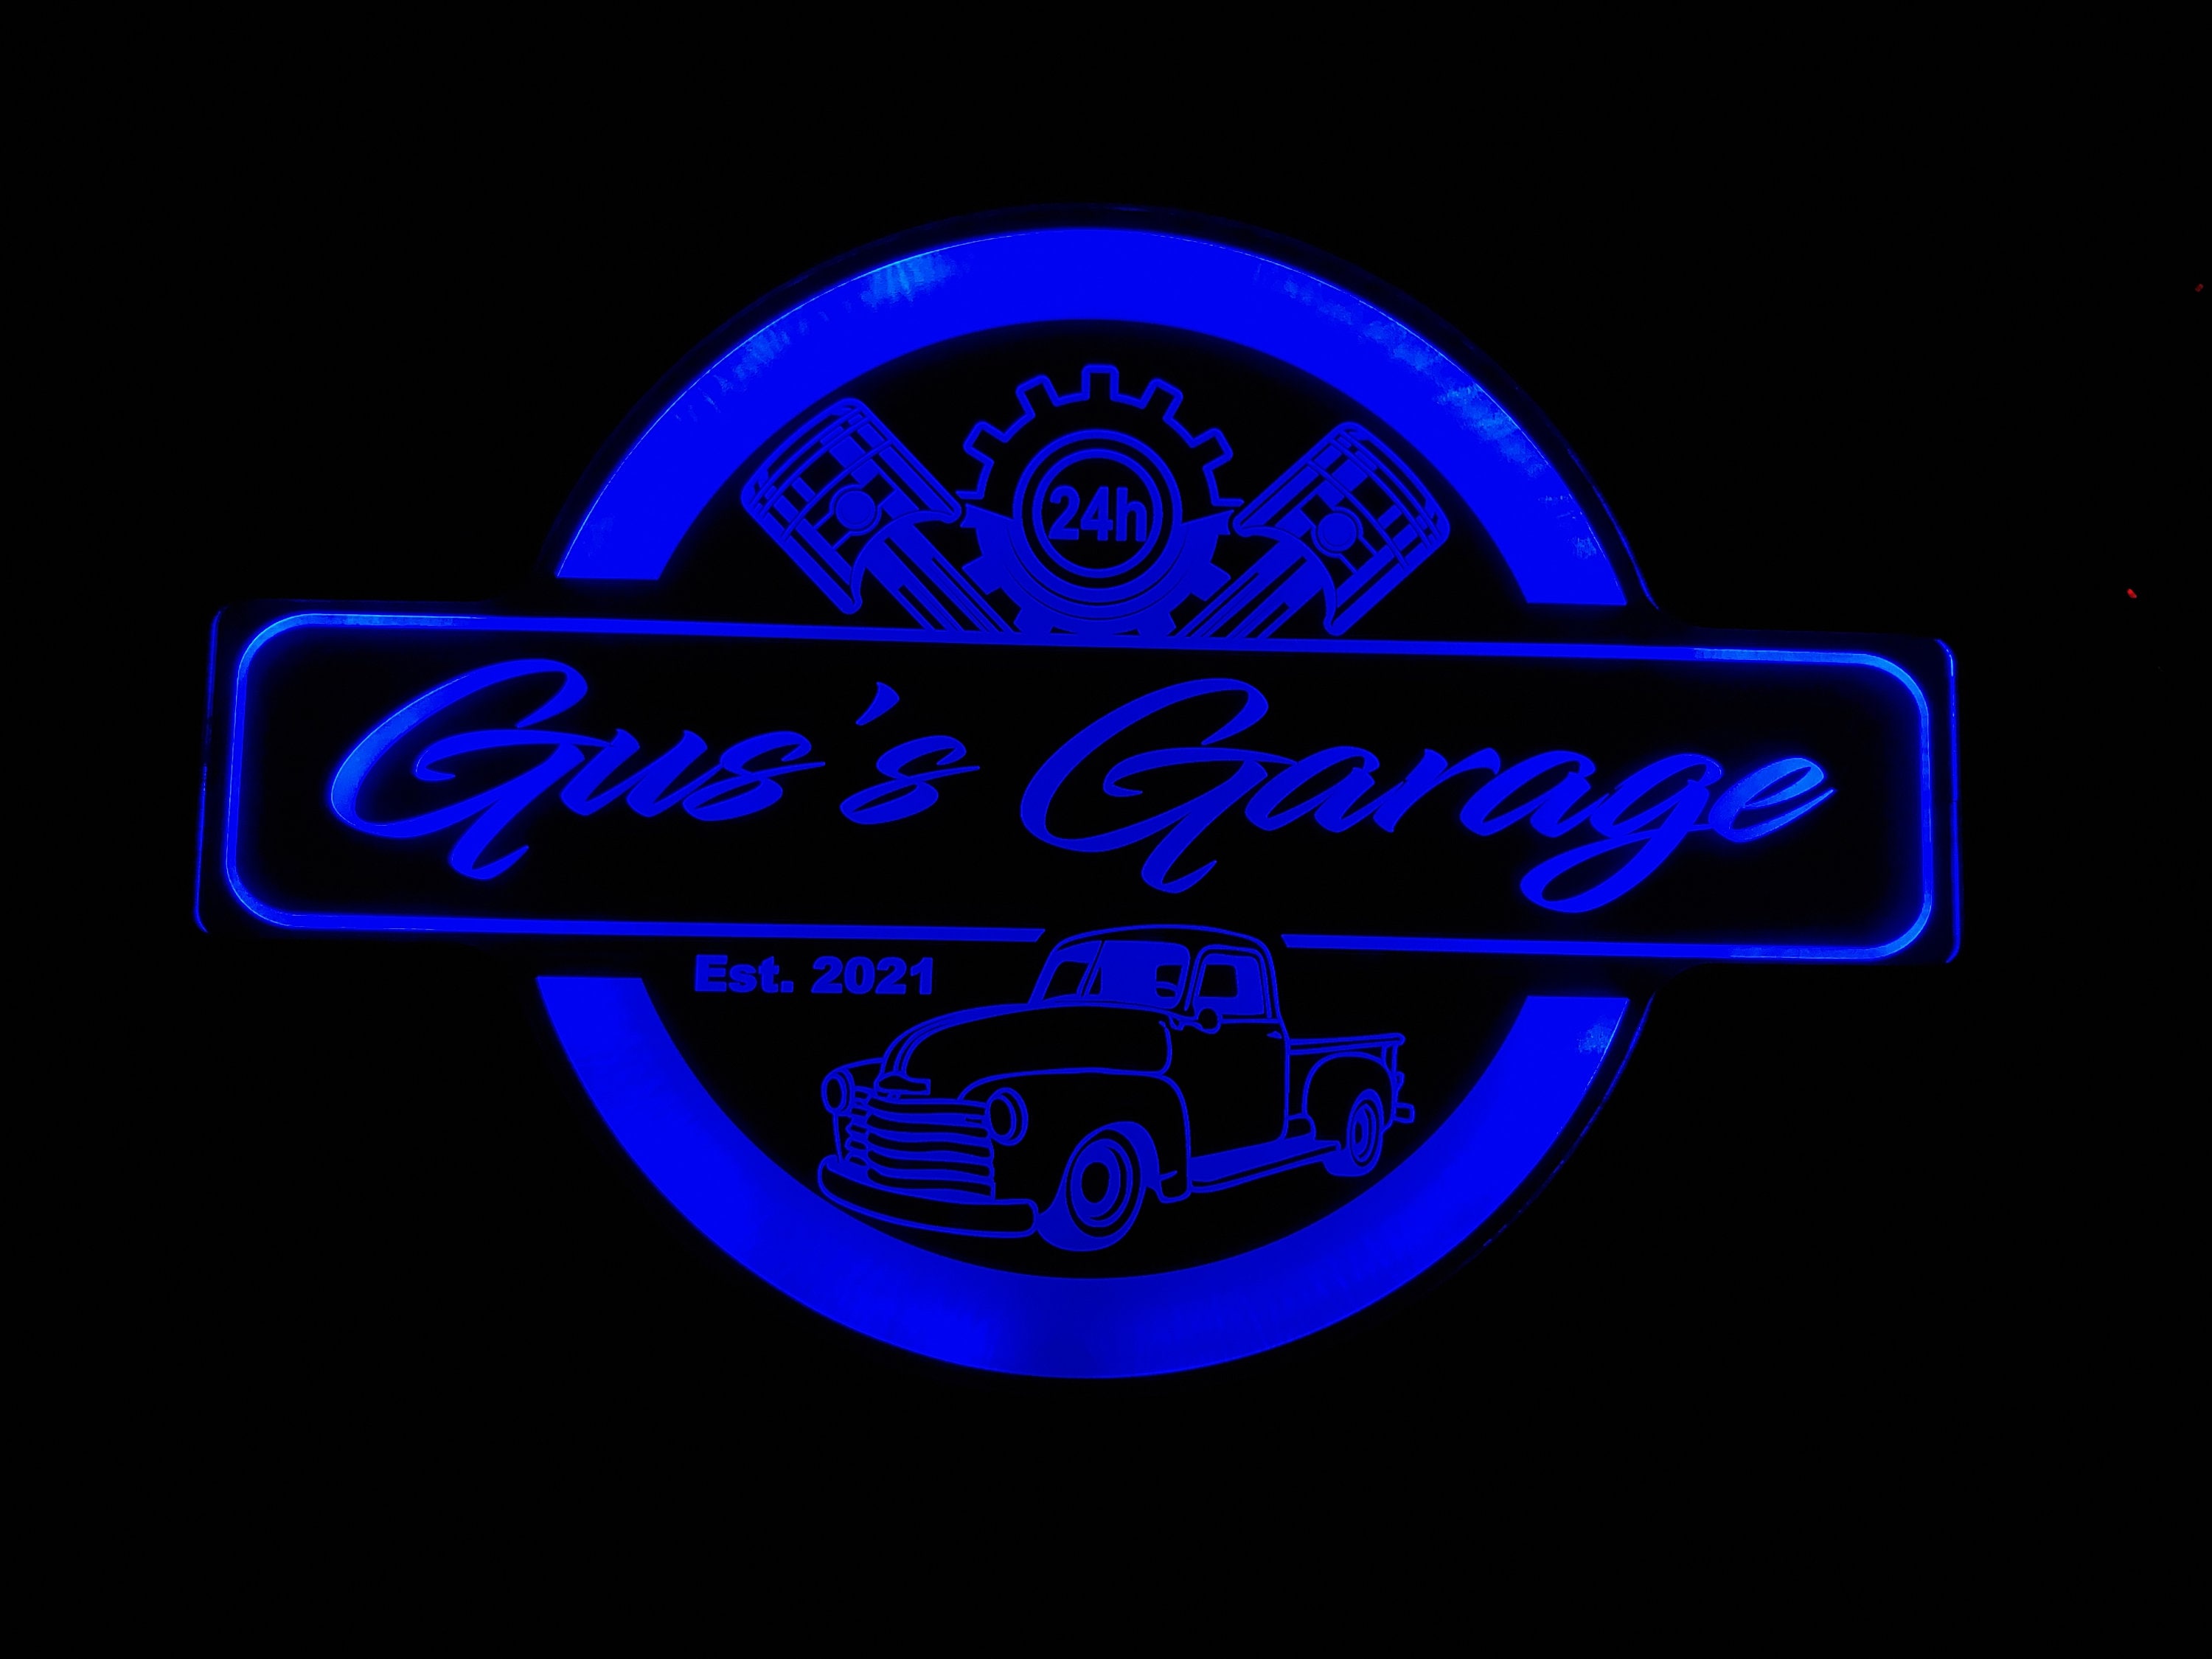 Trucks Color Changing Acrylic Free Shipping 4 Sizes Led Night Light Tractors Custom Sign with Cars Neon-Like